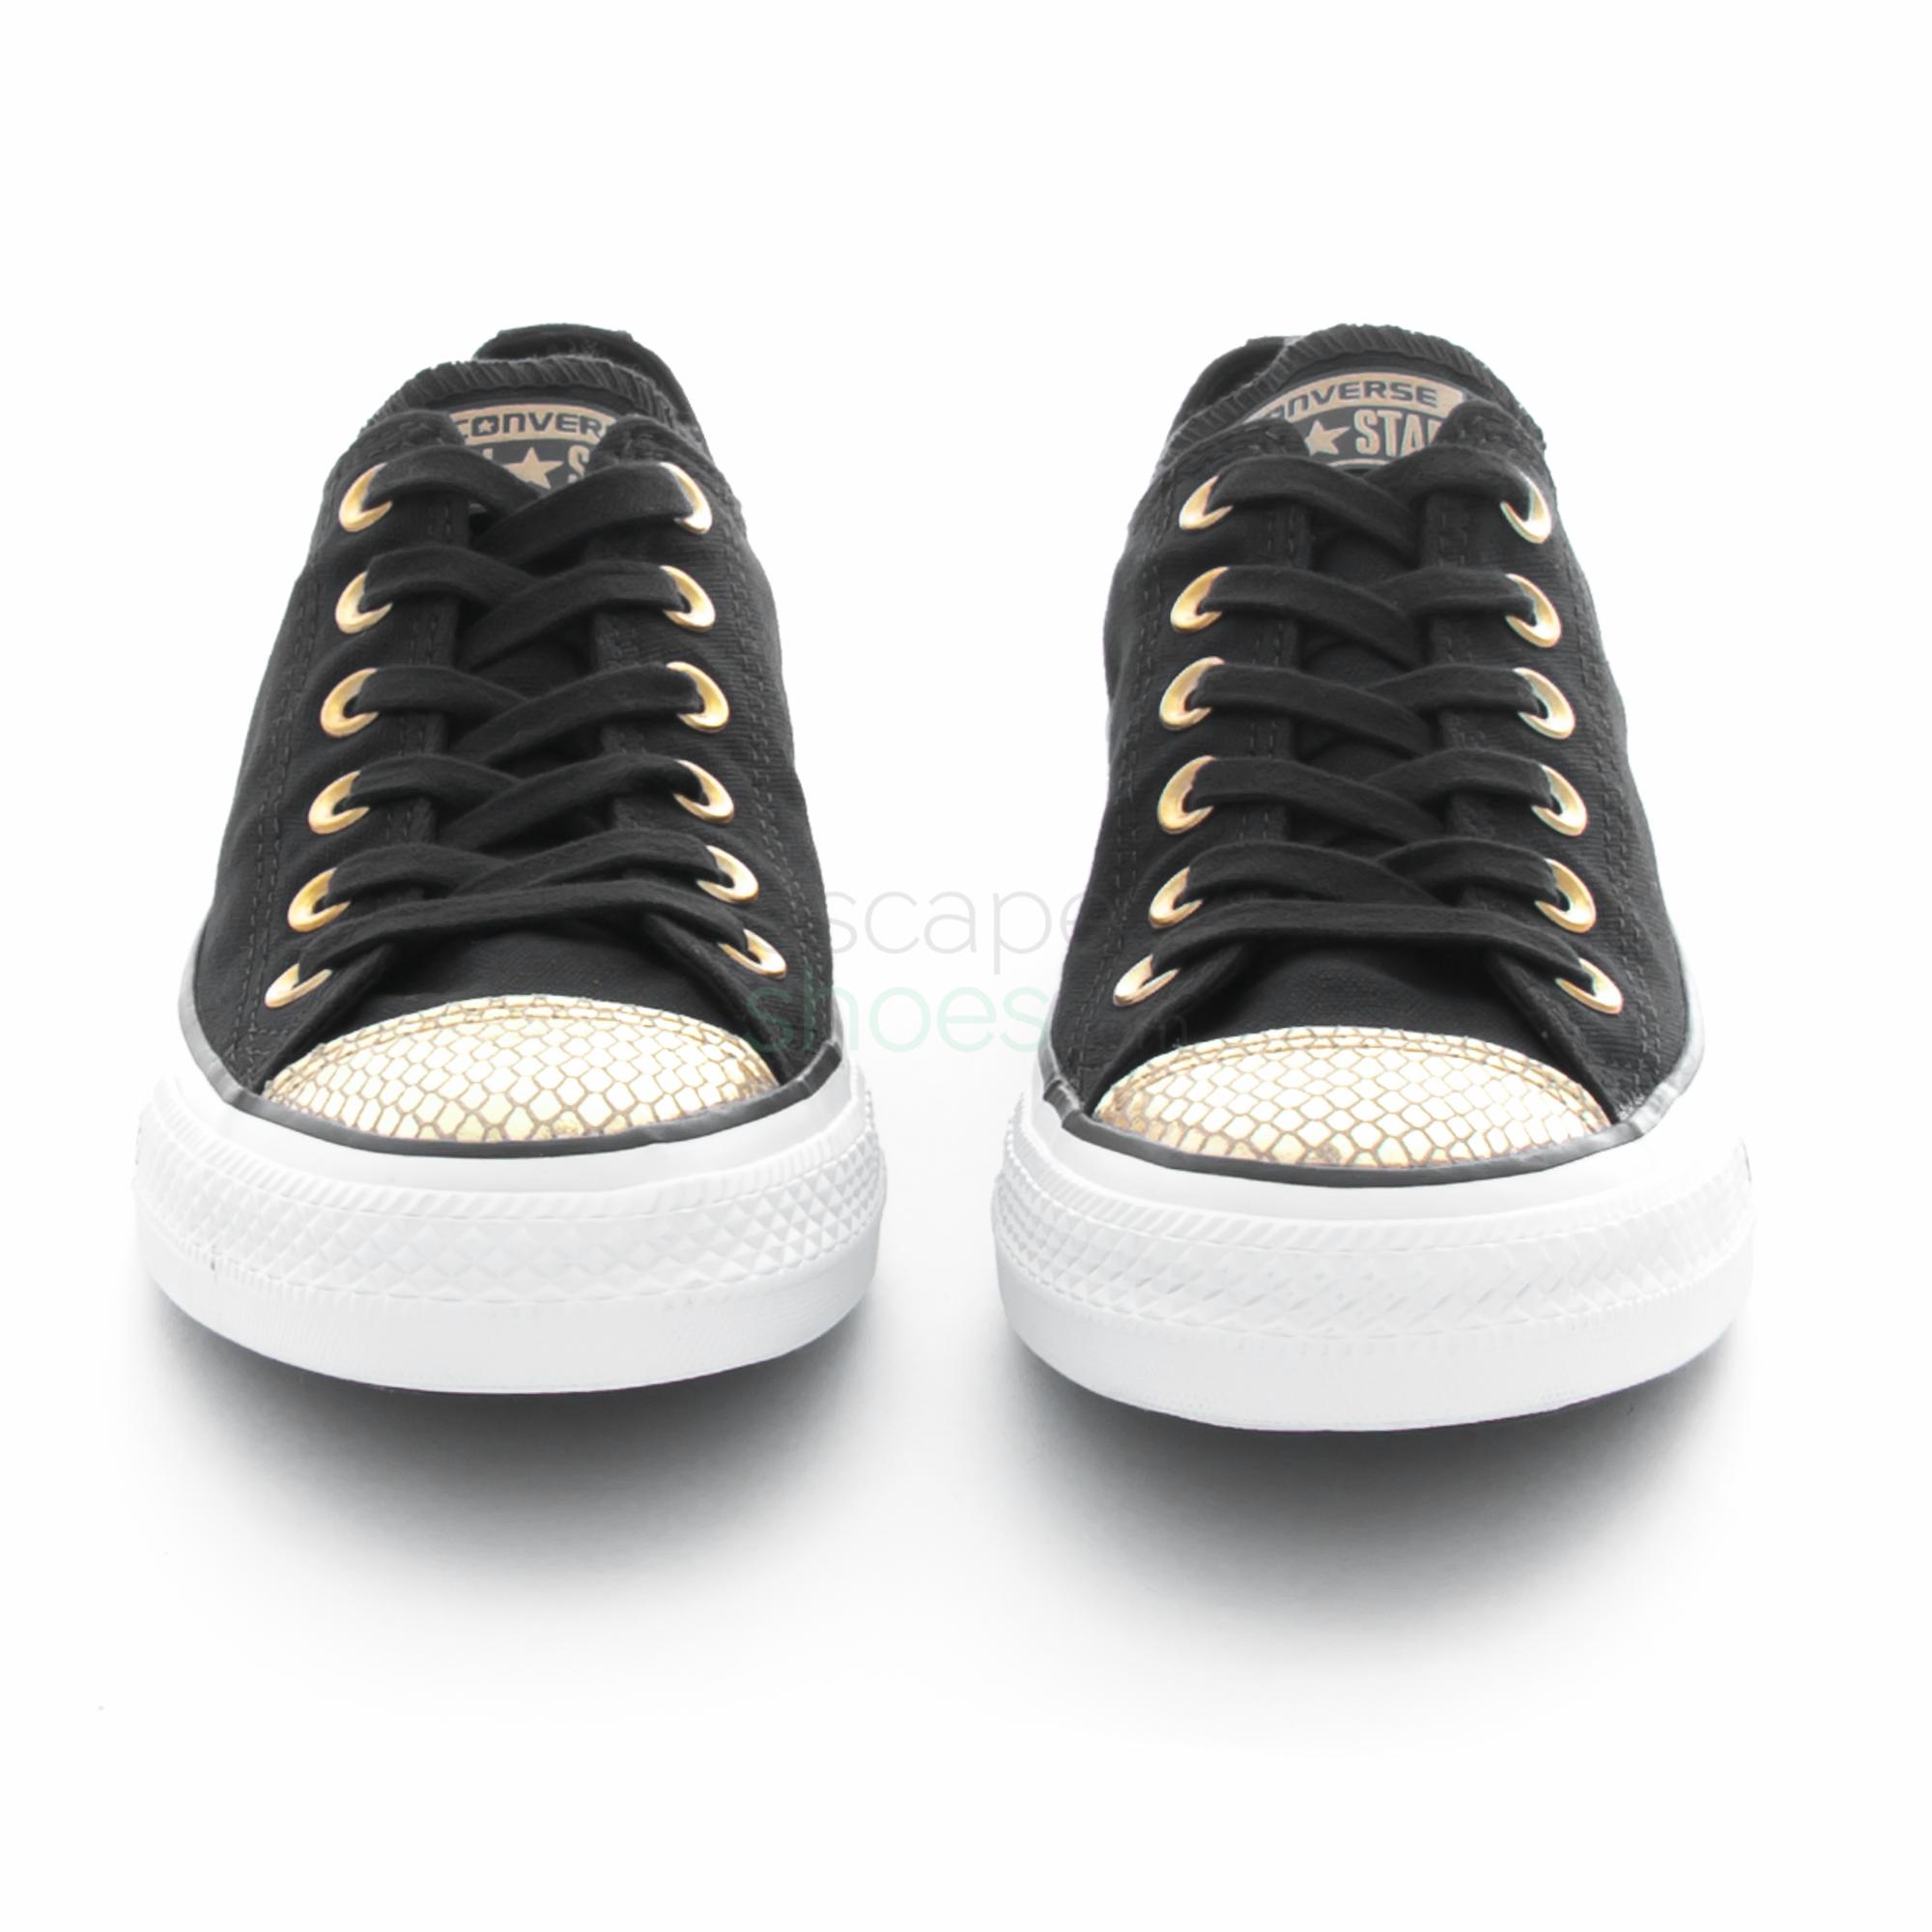 converse gold and black